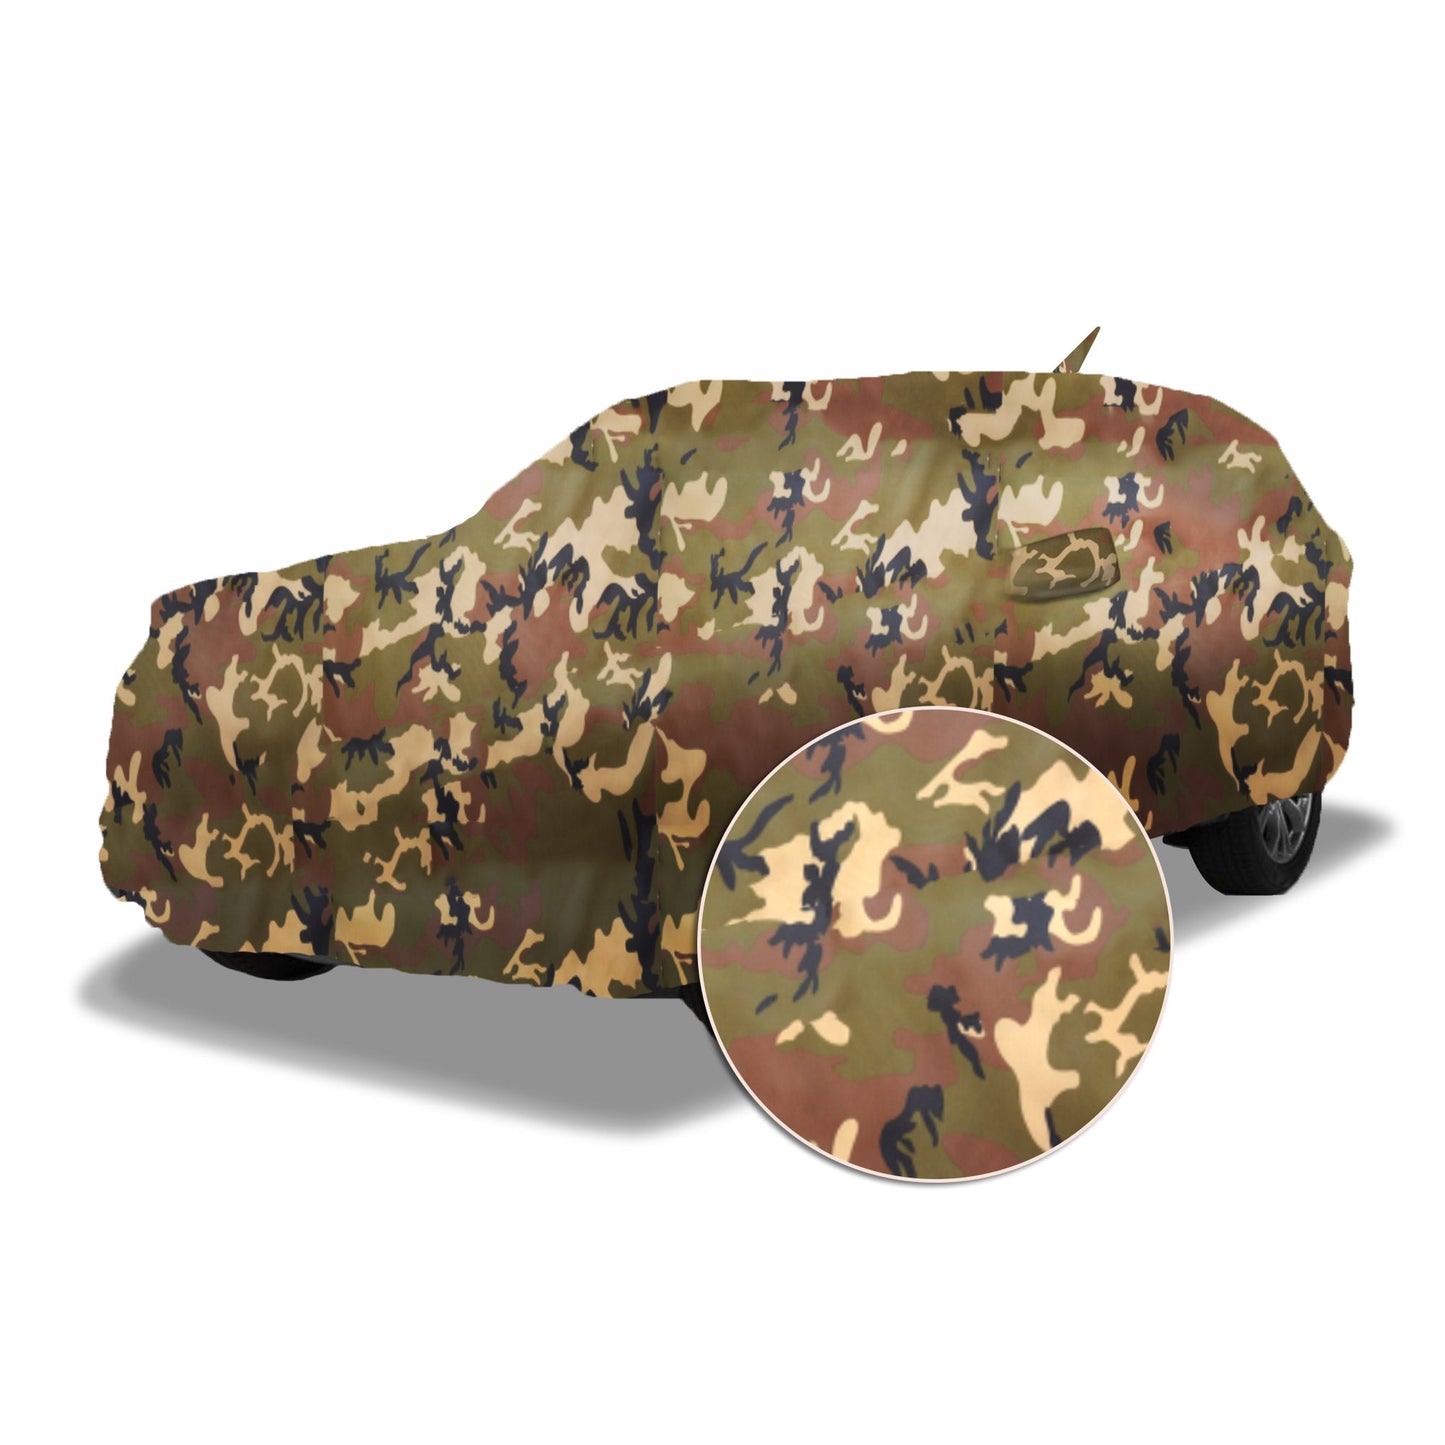 Ascot Volkswagen New Taigun Car Body Cover Extra Strong & Dust Proof Jungle Military Car Cover with UV Proof & Water-Resistant Coating